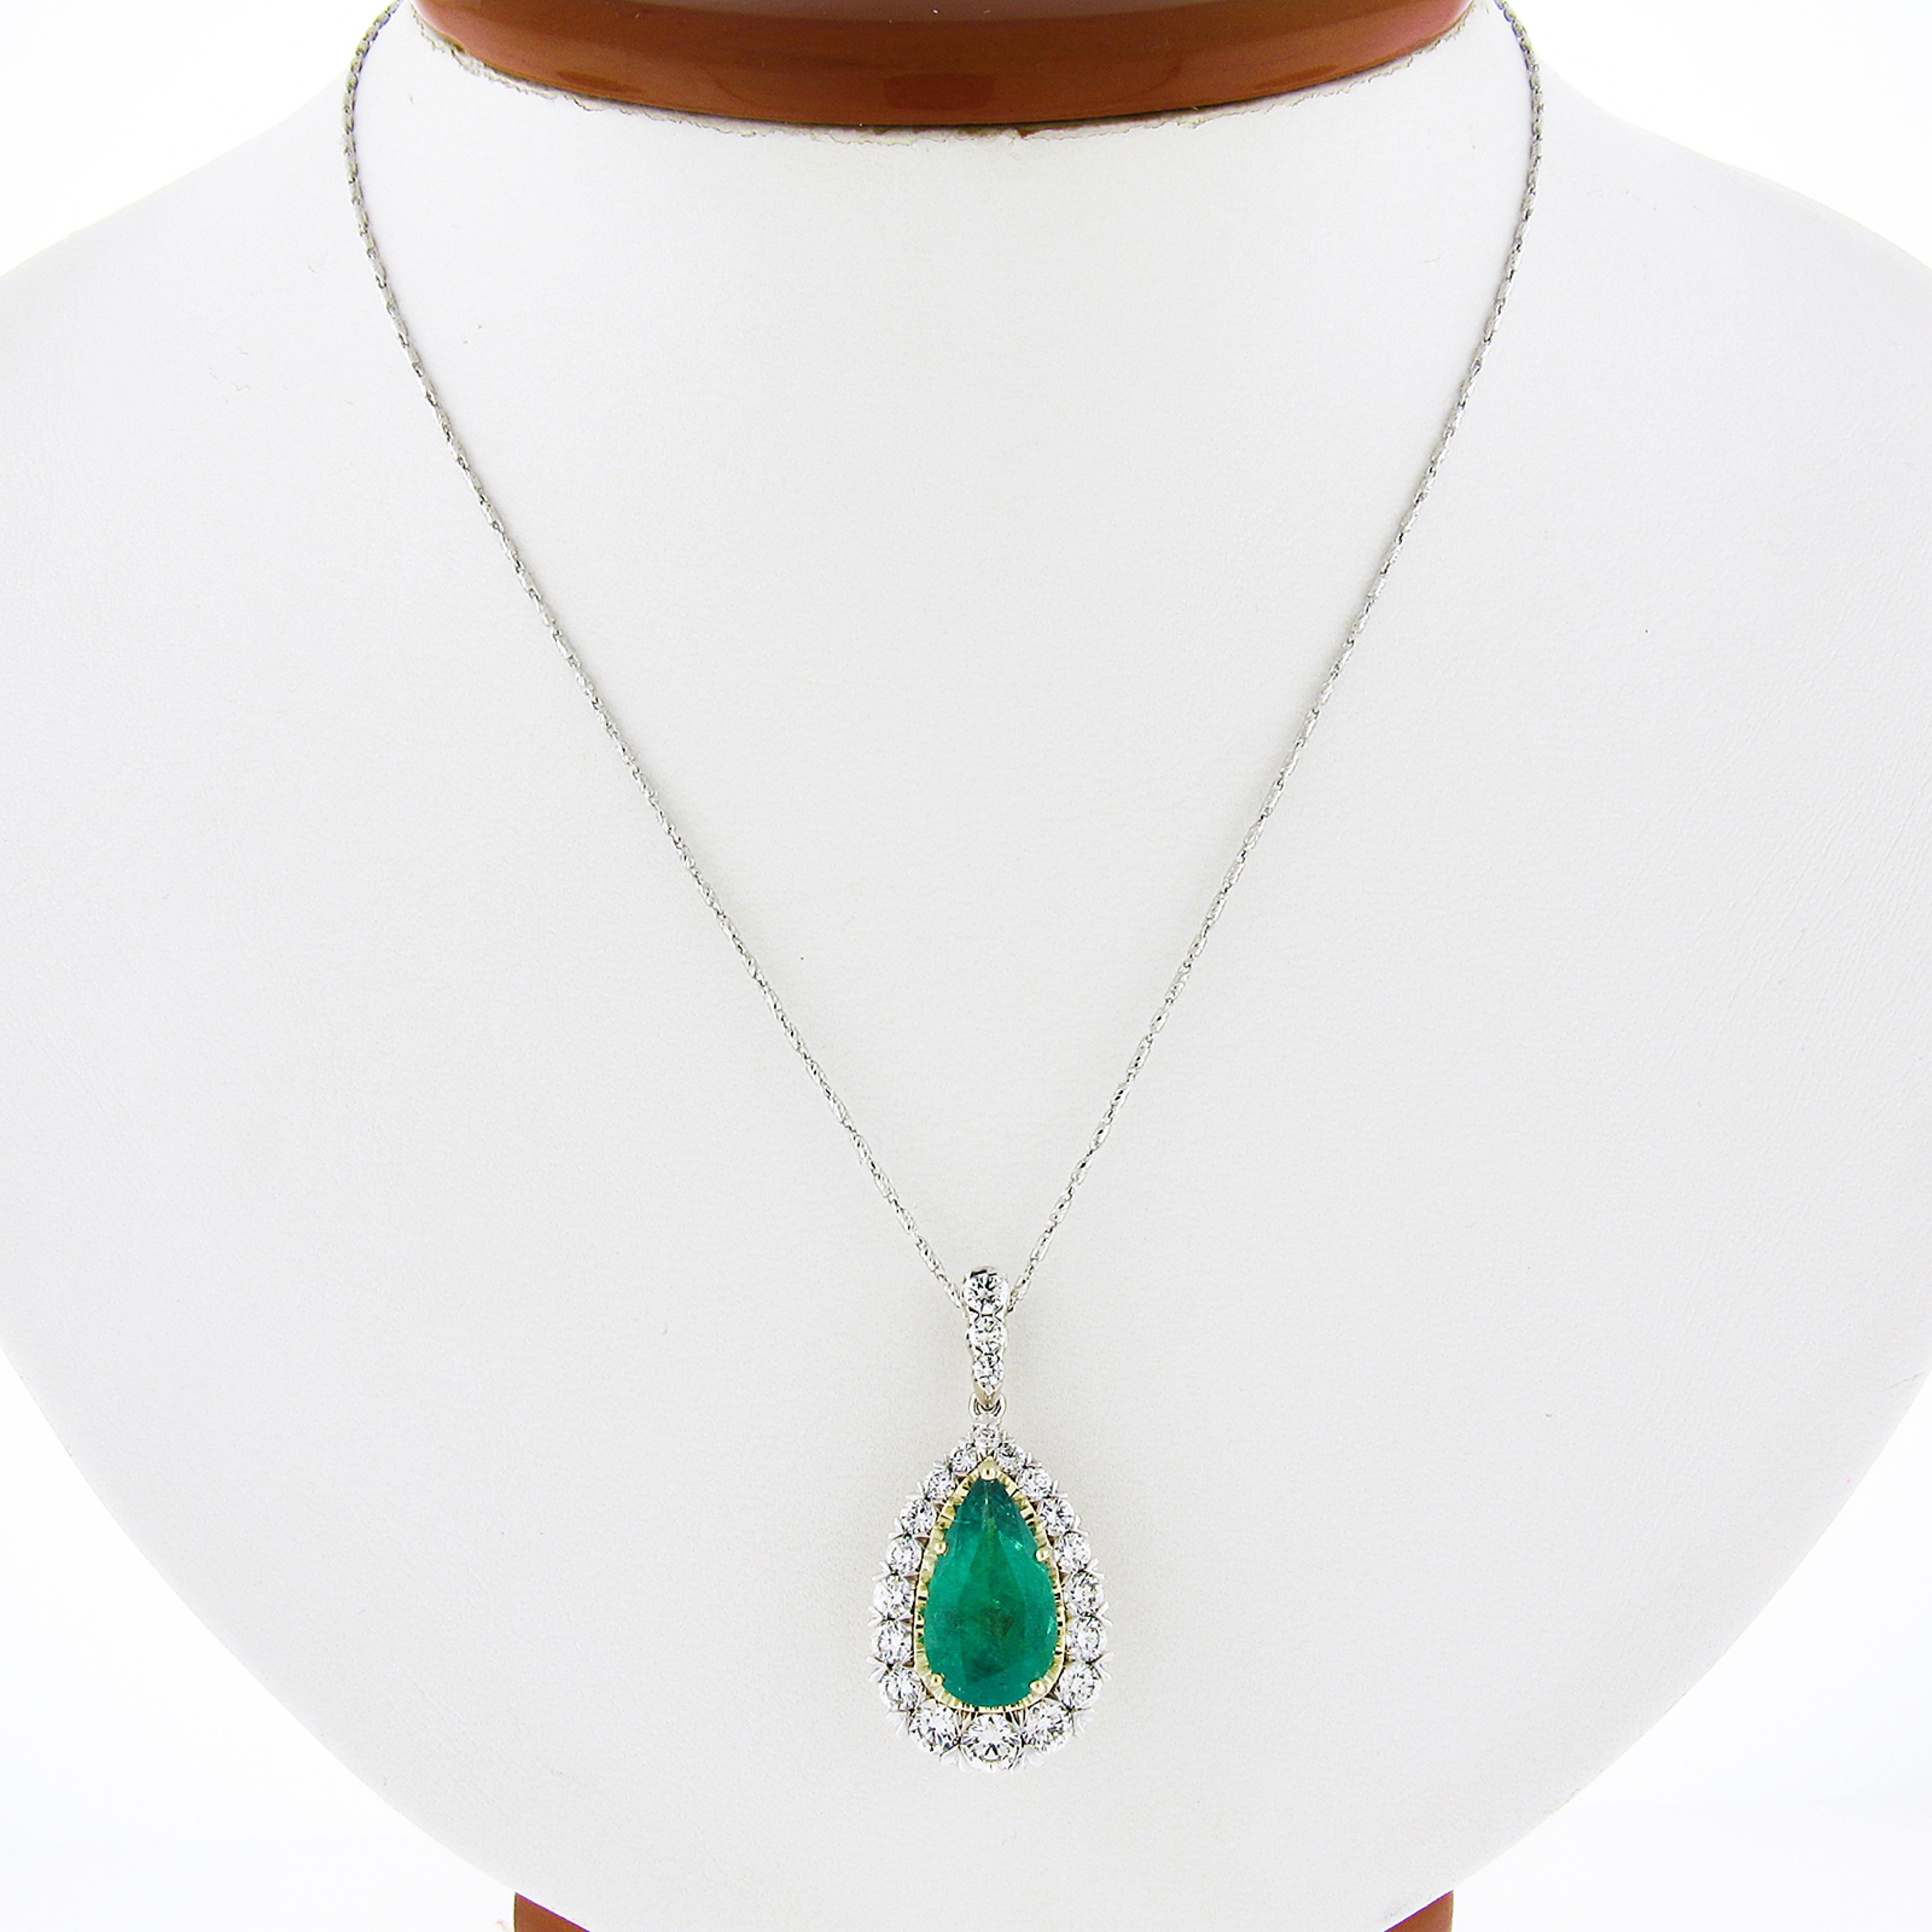 Here we have an absolutely magnificent and truly jaw dropping custom made pendant that is crafted from solid 18k white gold with a yellow gold center, carrying a gorgeous, GIA certified, natural emerald stone surrounded by a super fiery diamond halo